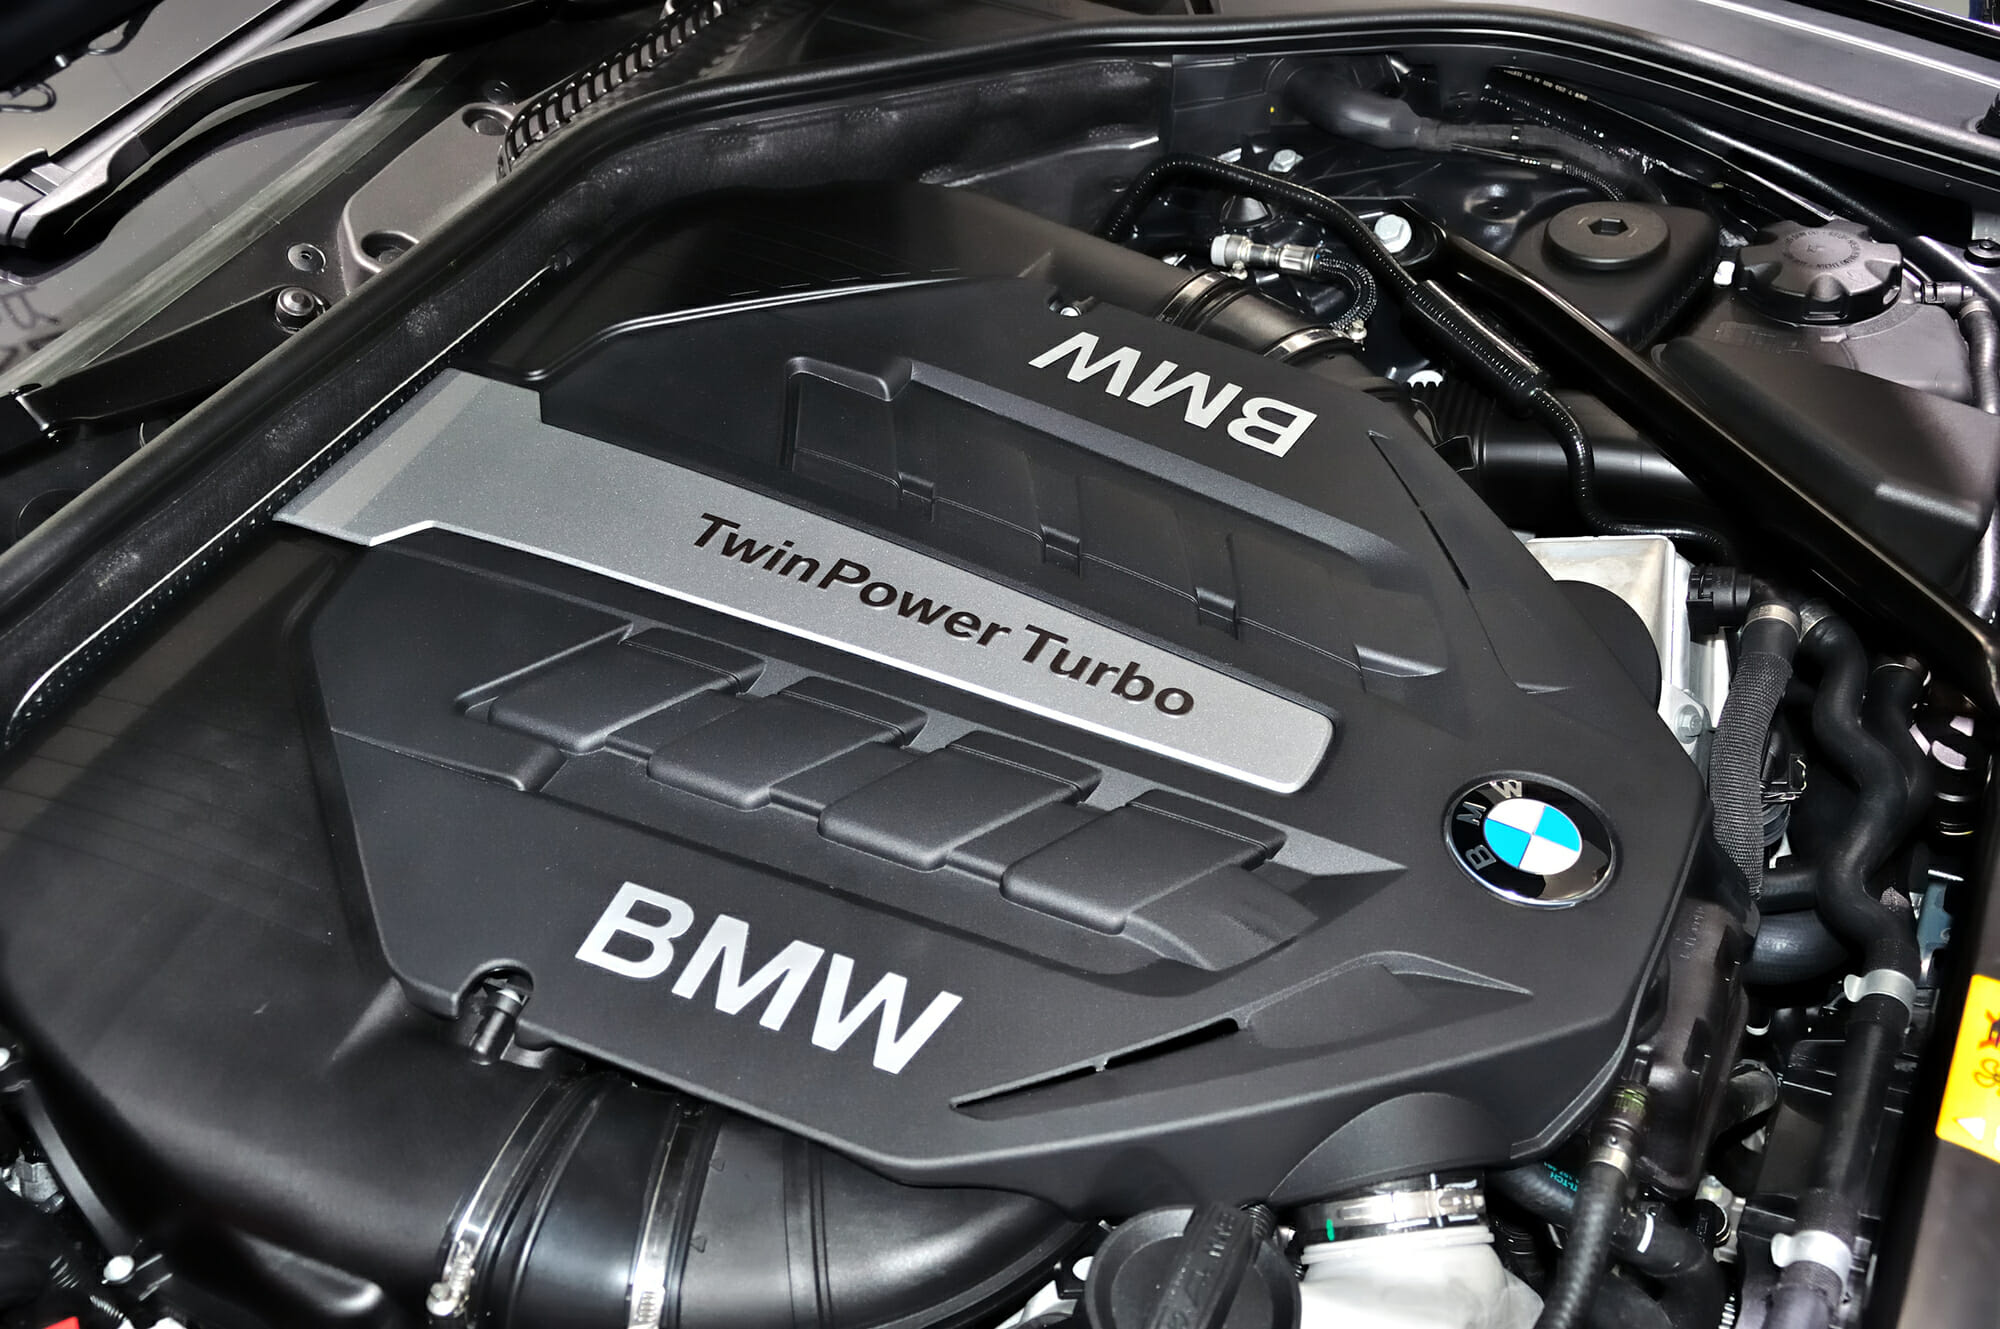 BMW Engine shown under the hood of vehicle